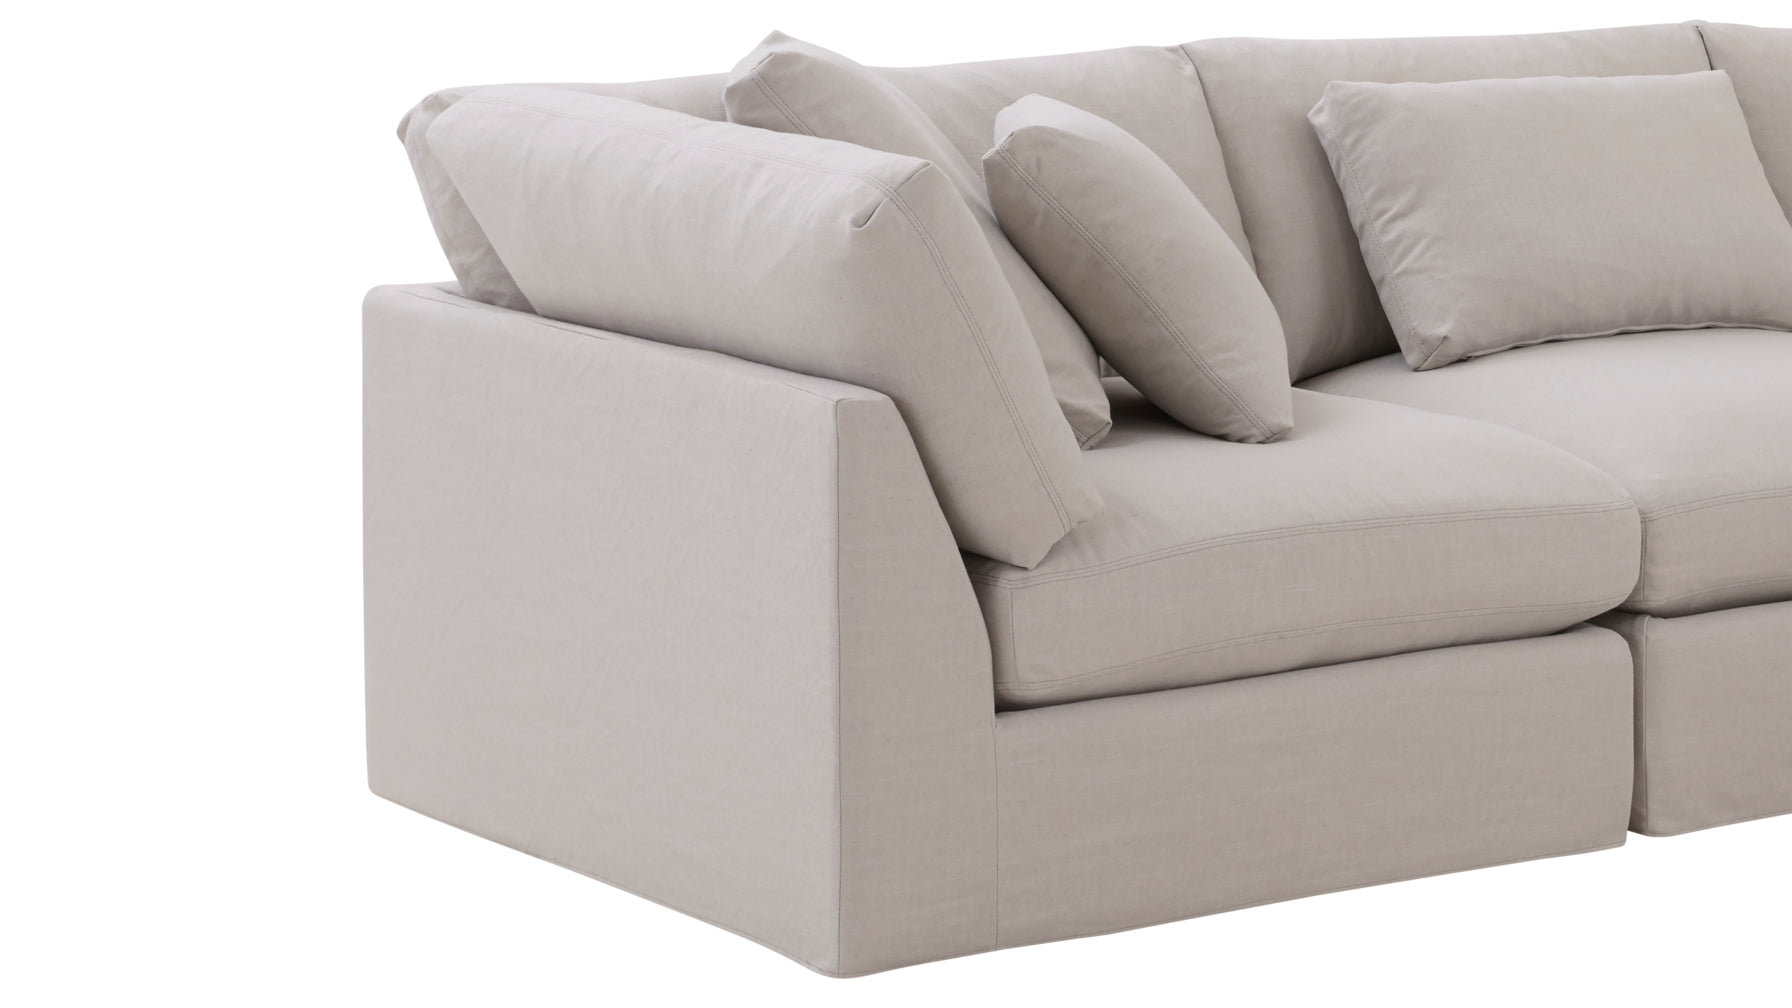 Get Together™ 4-Piece Modular Sectional Closed, Large, Clay - Image 10